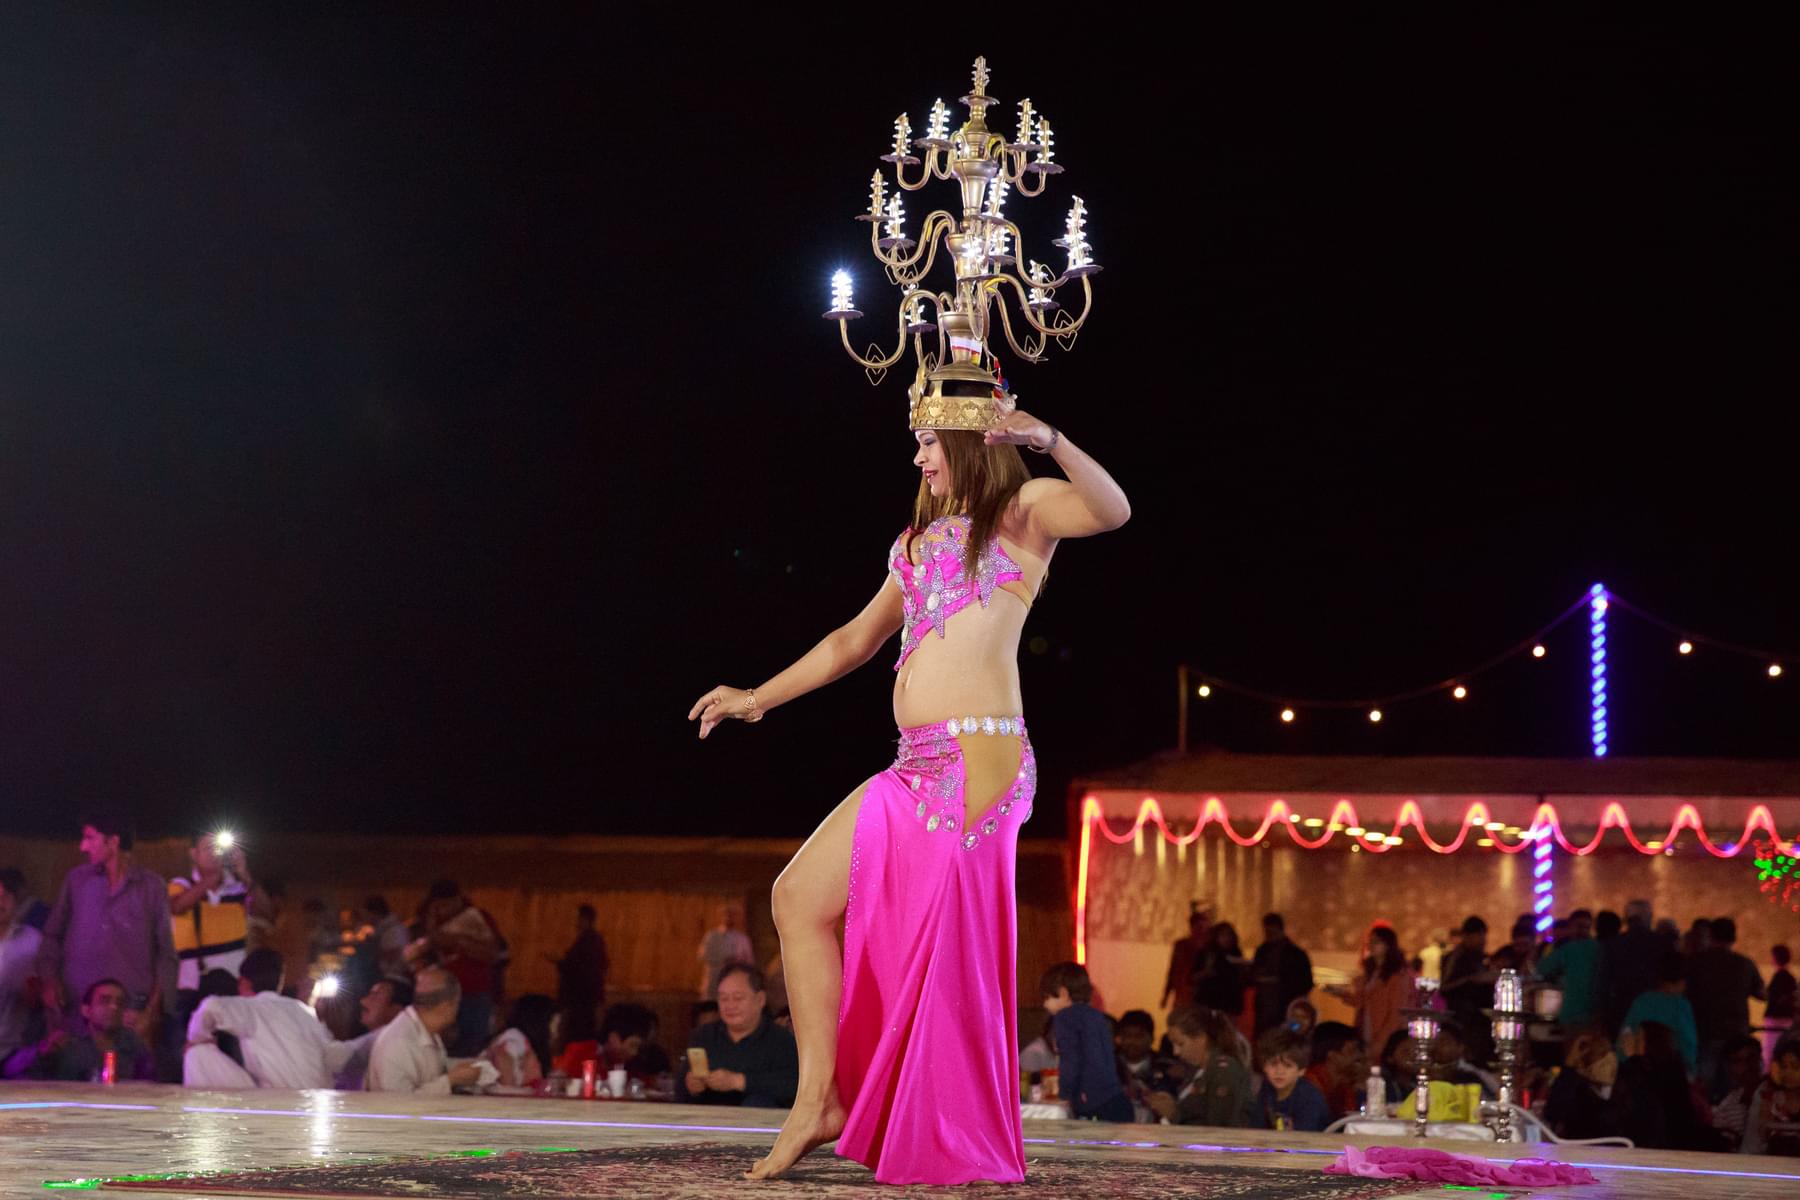 Barbeque dinner and belly dance show